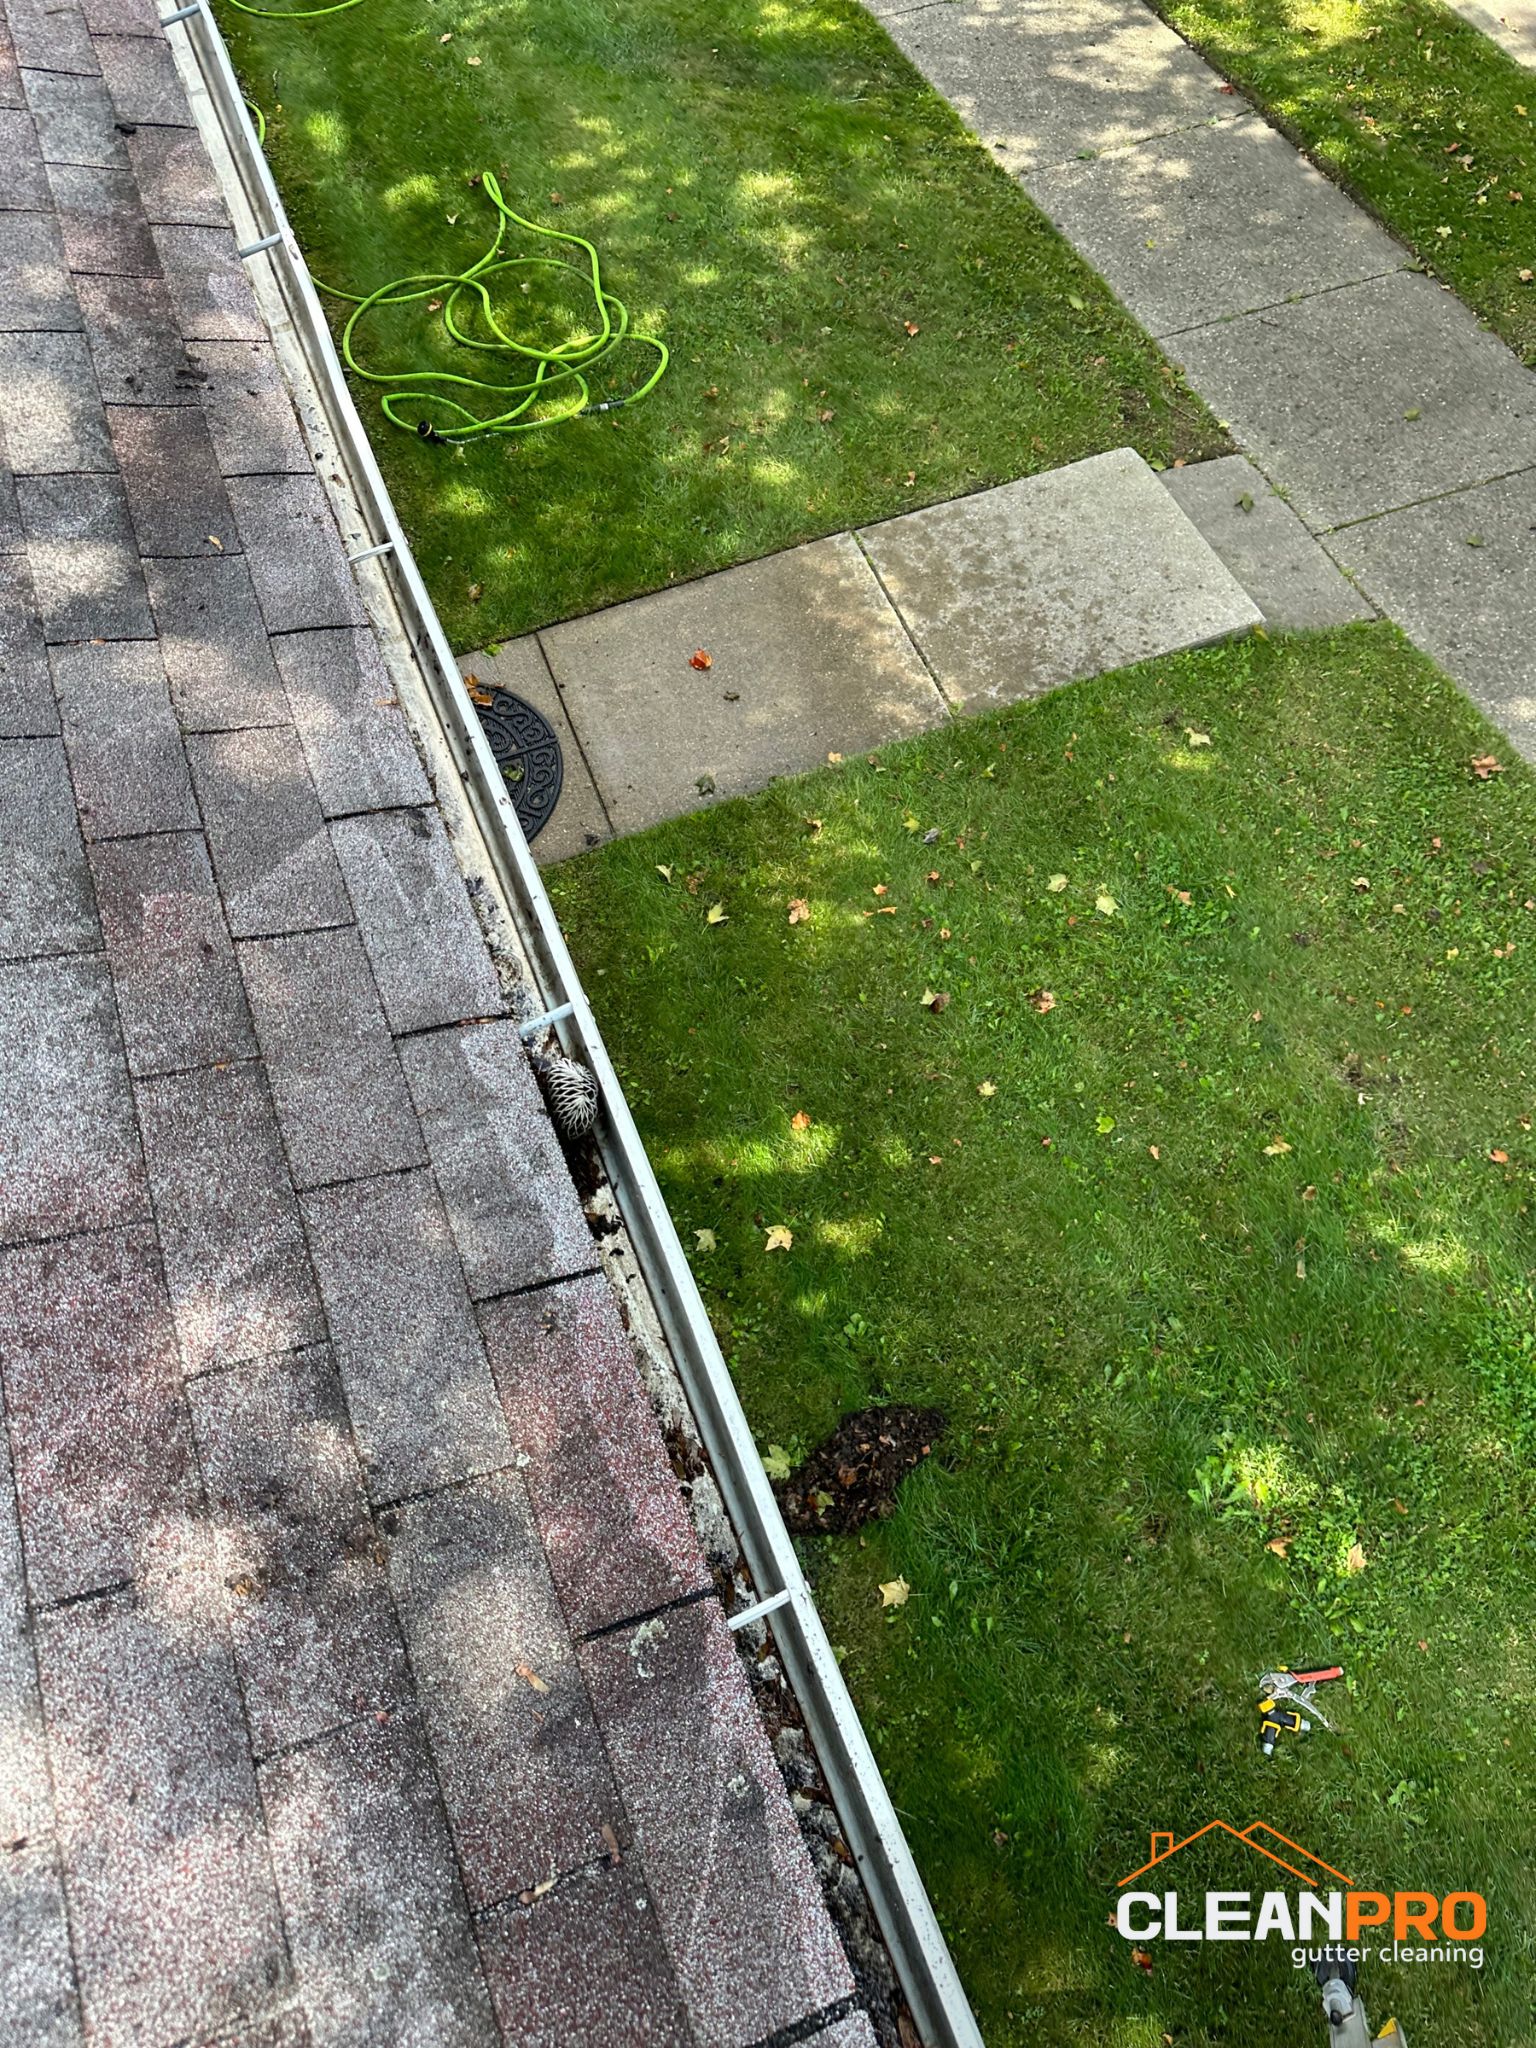 Top Notch Gutter Cleaning Service in Des Moines